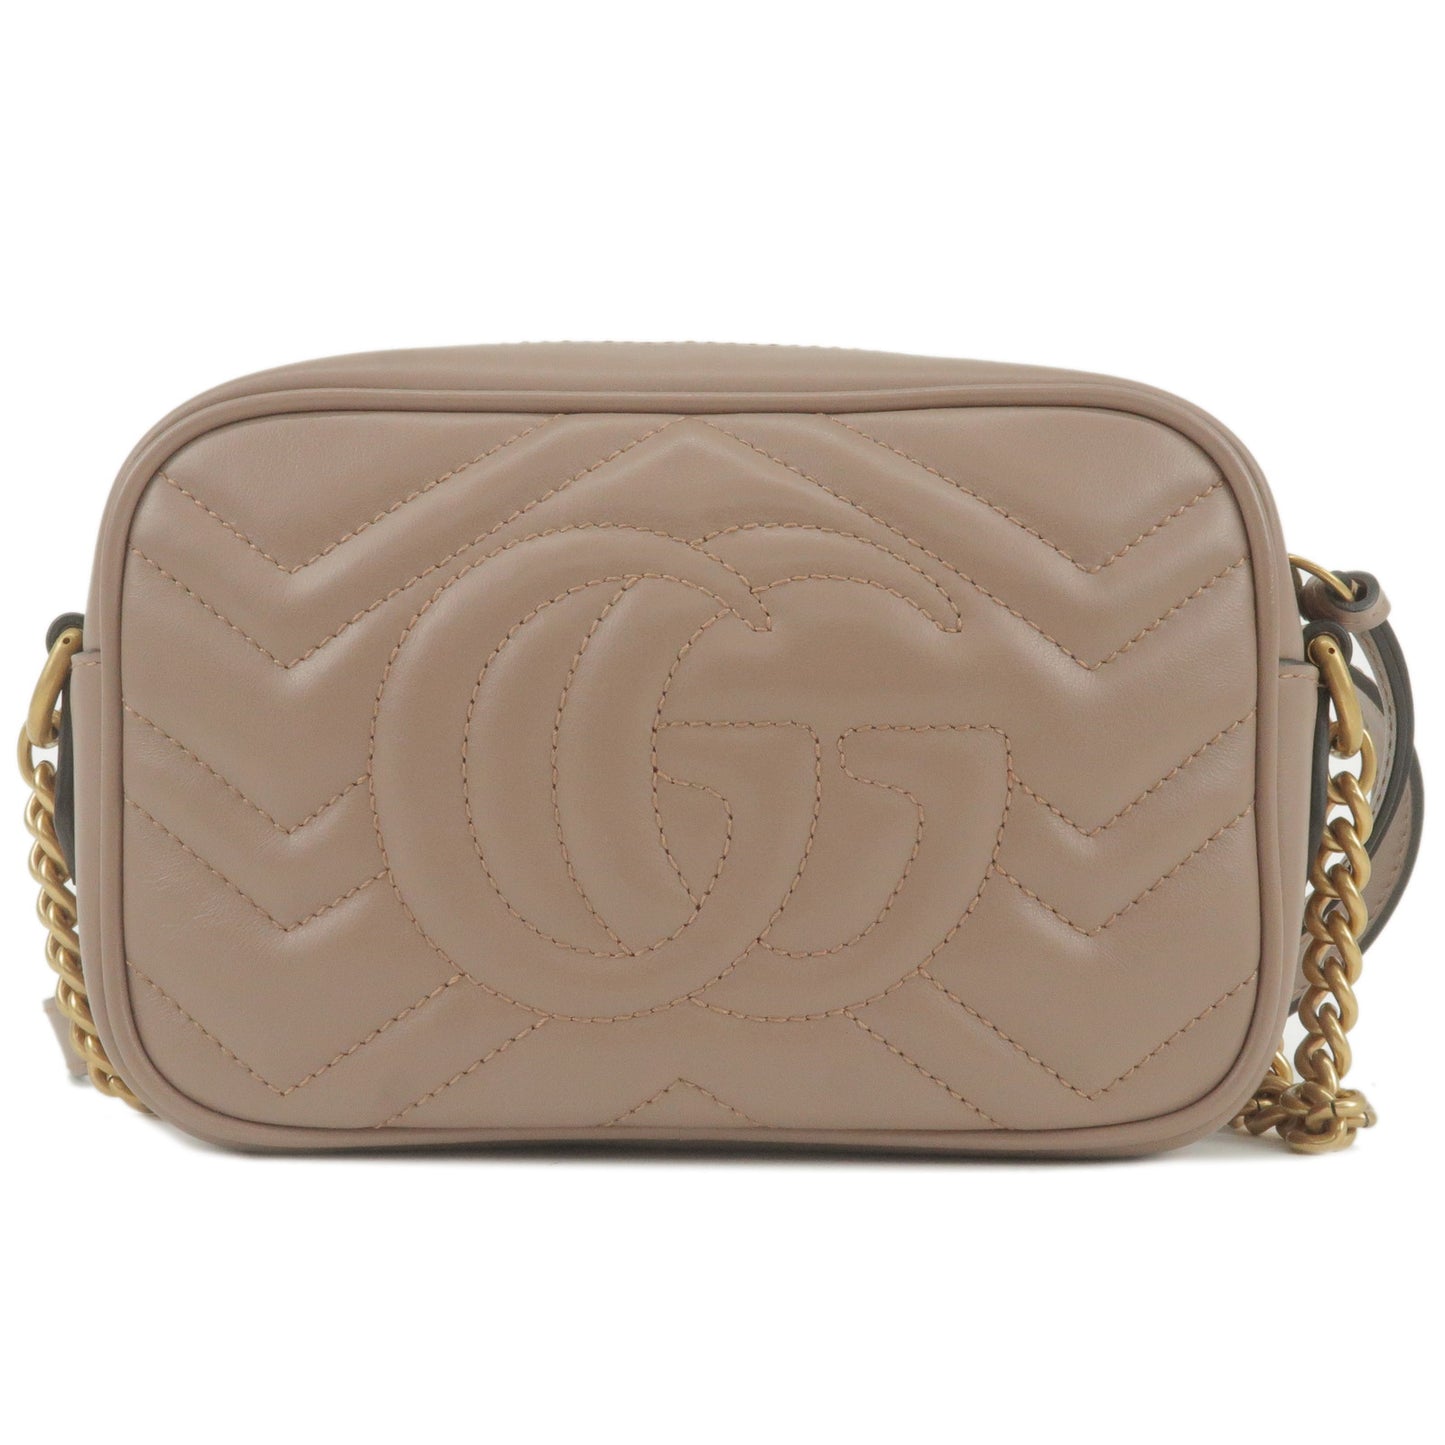 GUCCI GG Marmont Leather Chain Shoulder Bag Beige 448065